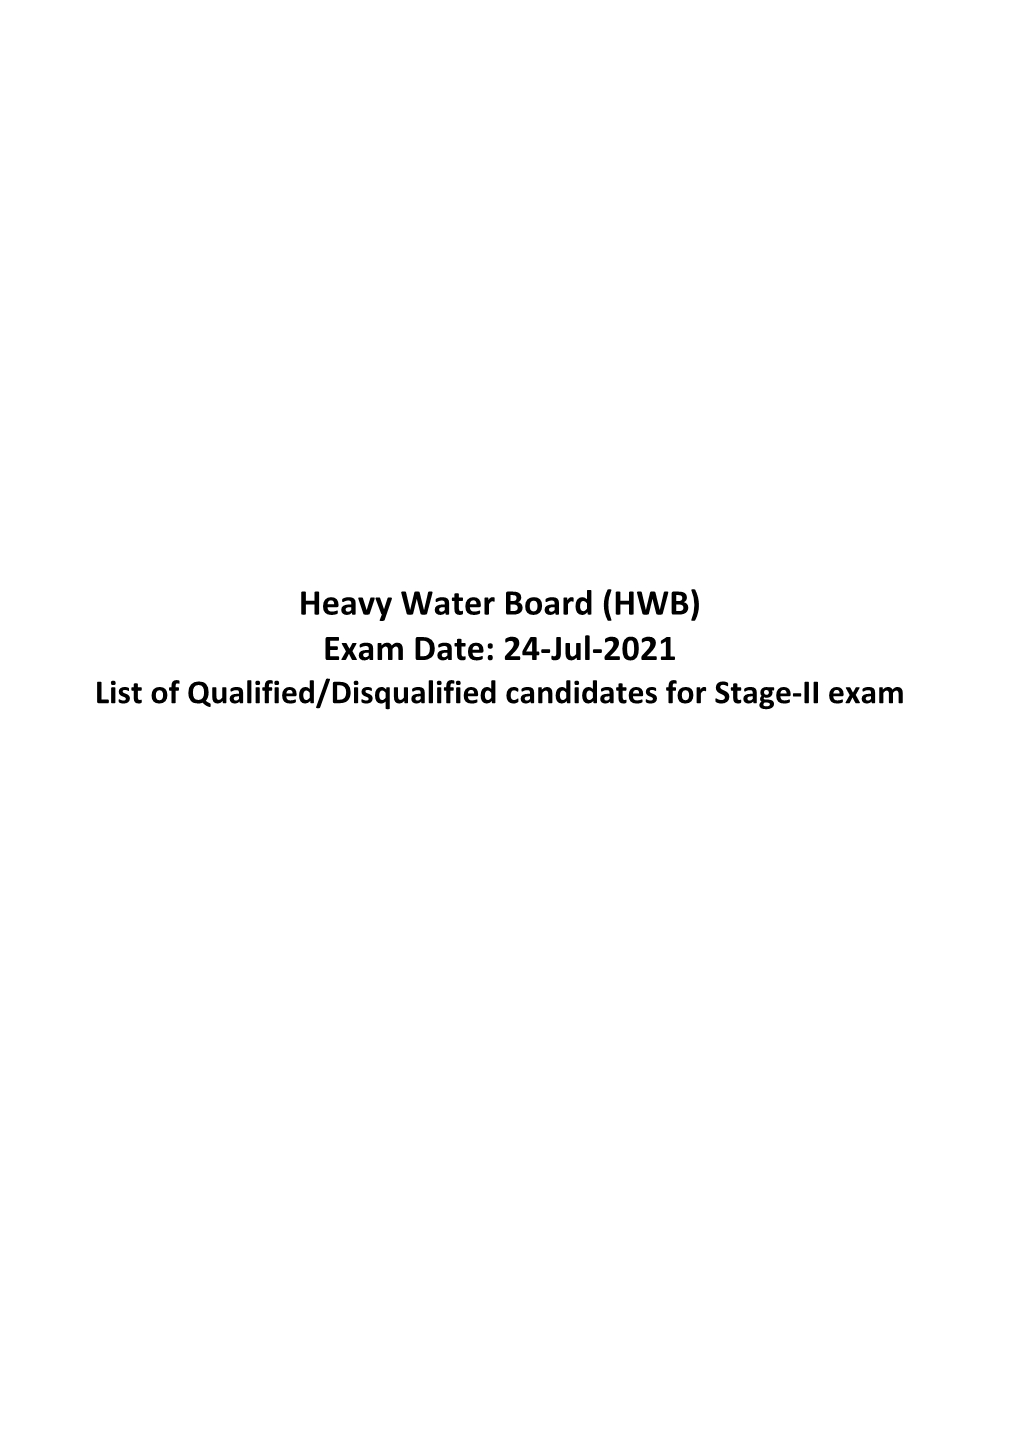 List of Qualified and Disqualified Candidates For